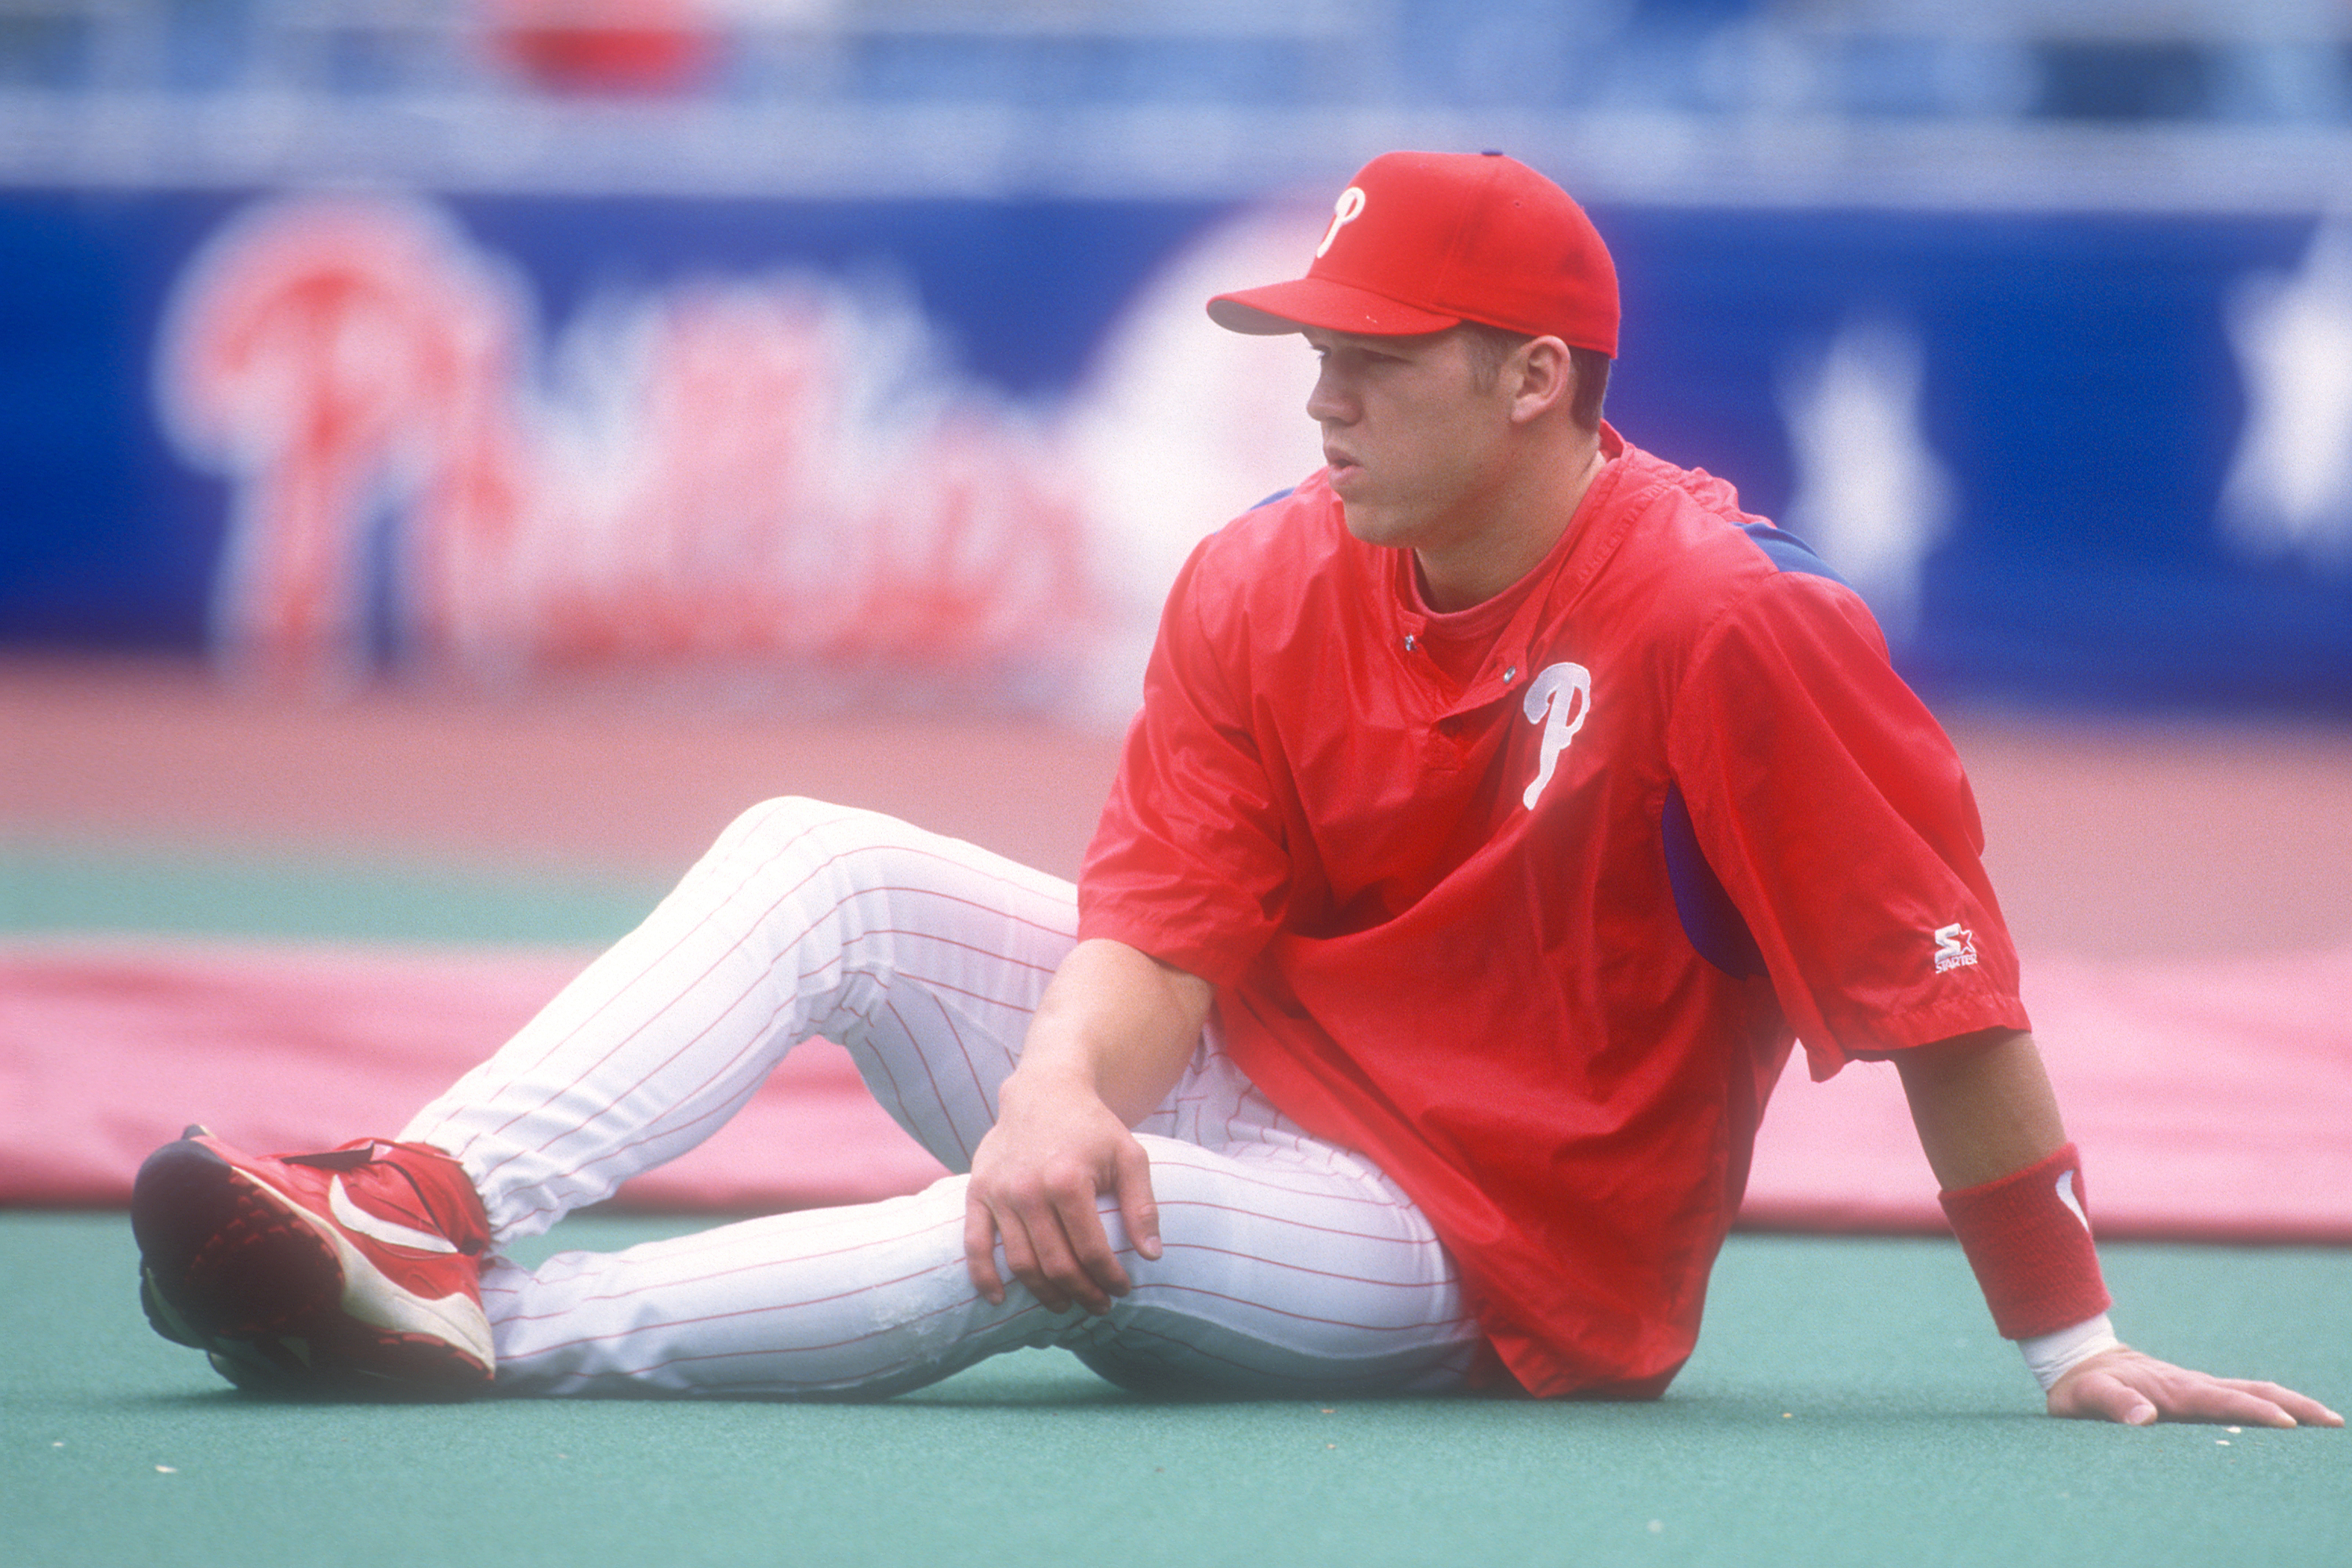 Former MLB All-Star and Baseball Hall of Fame nominee Scott Rolen stretches before a game in 1997